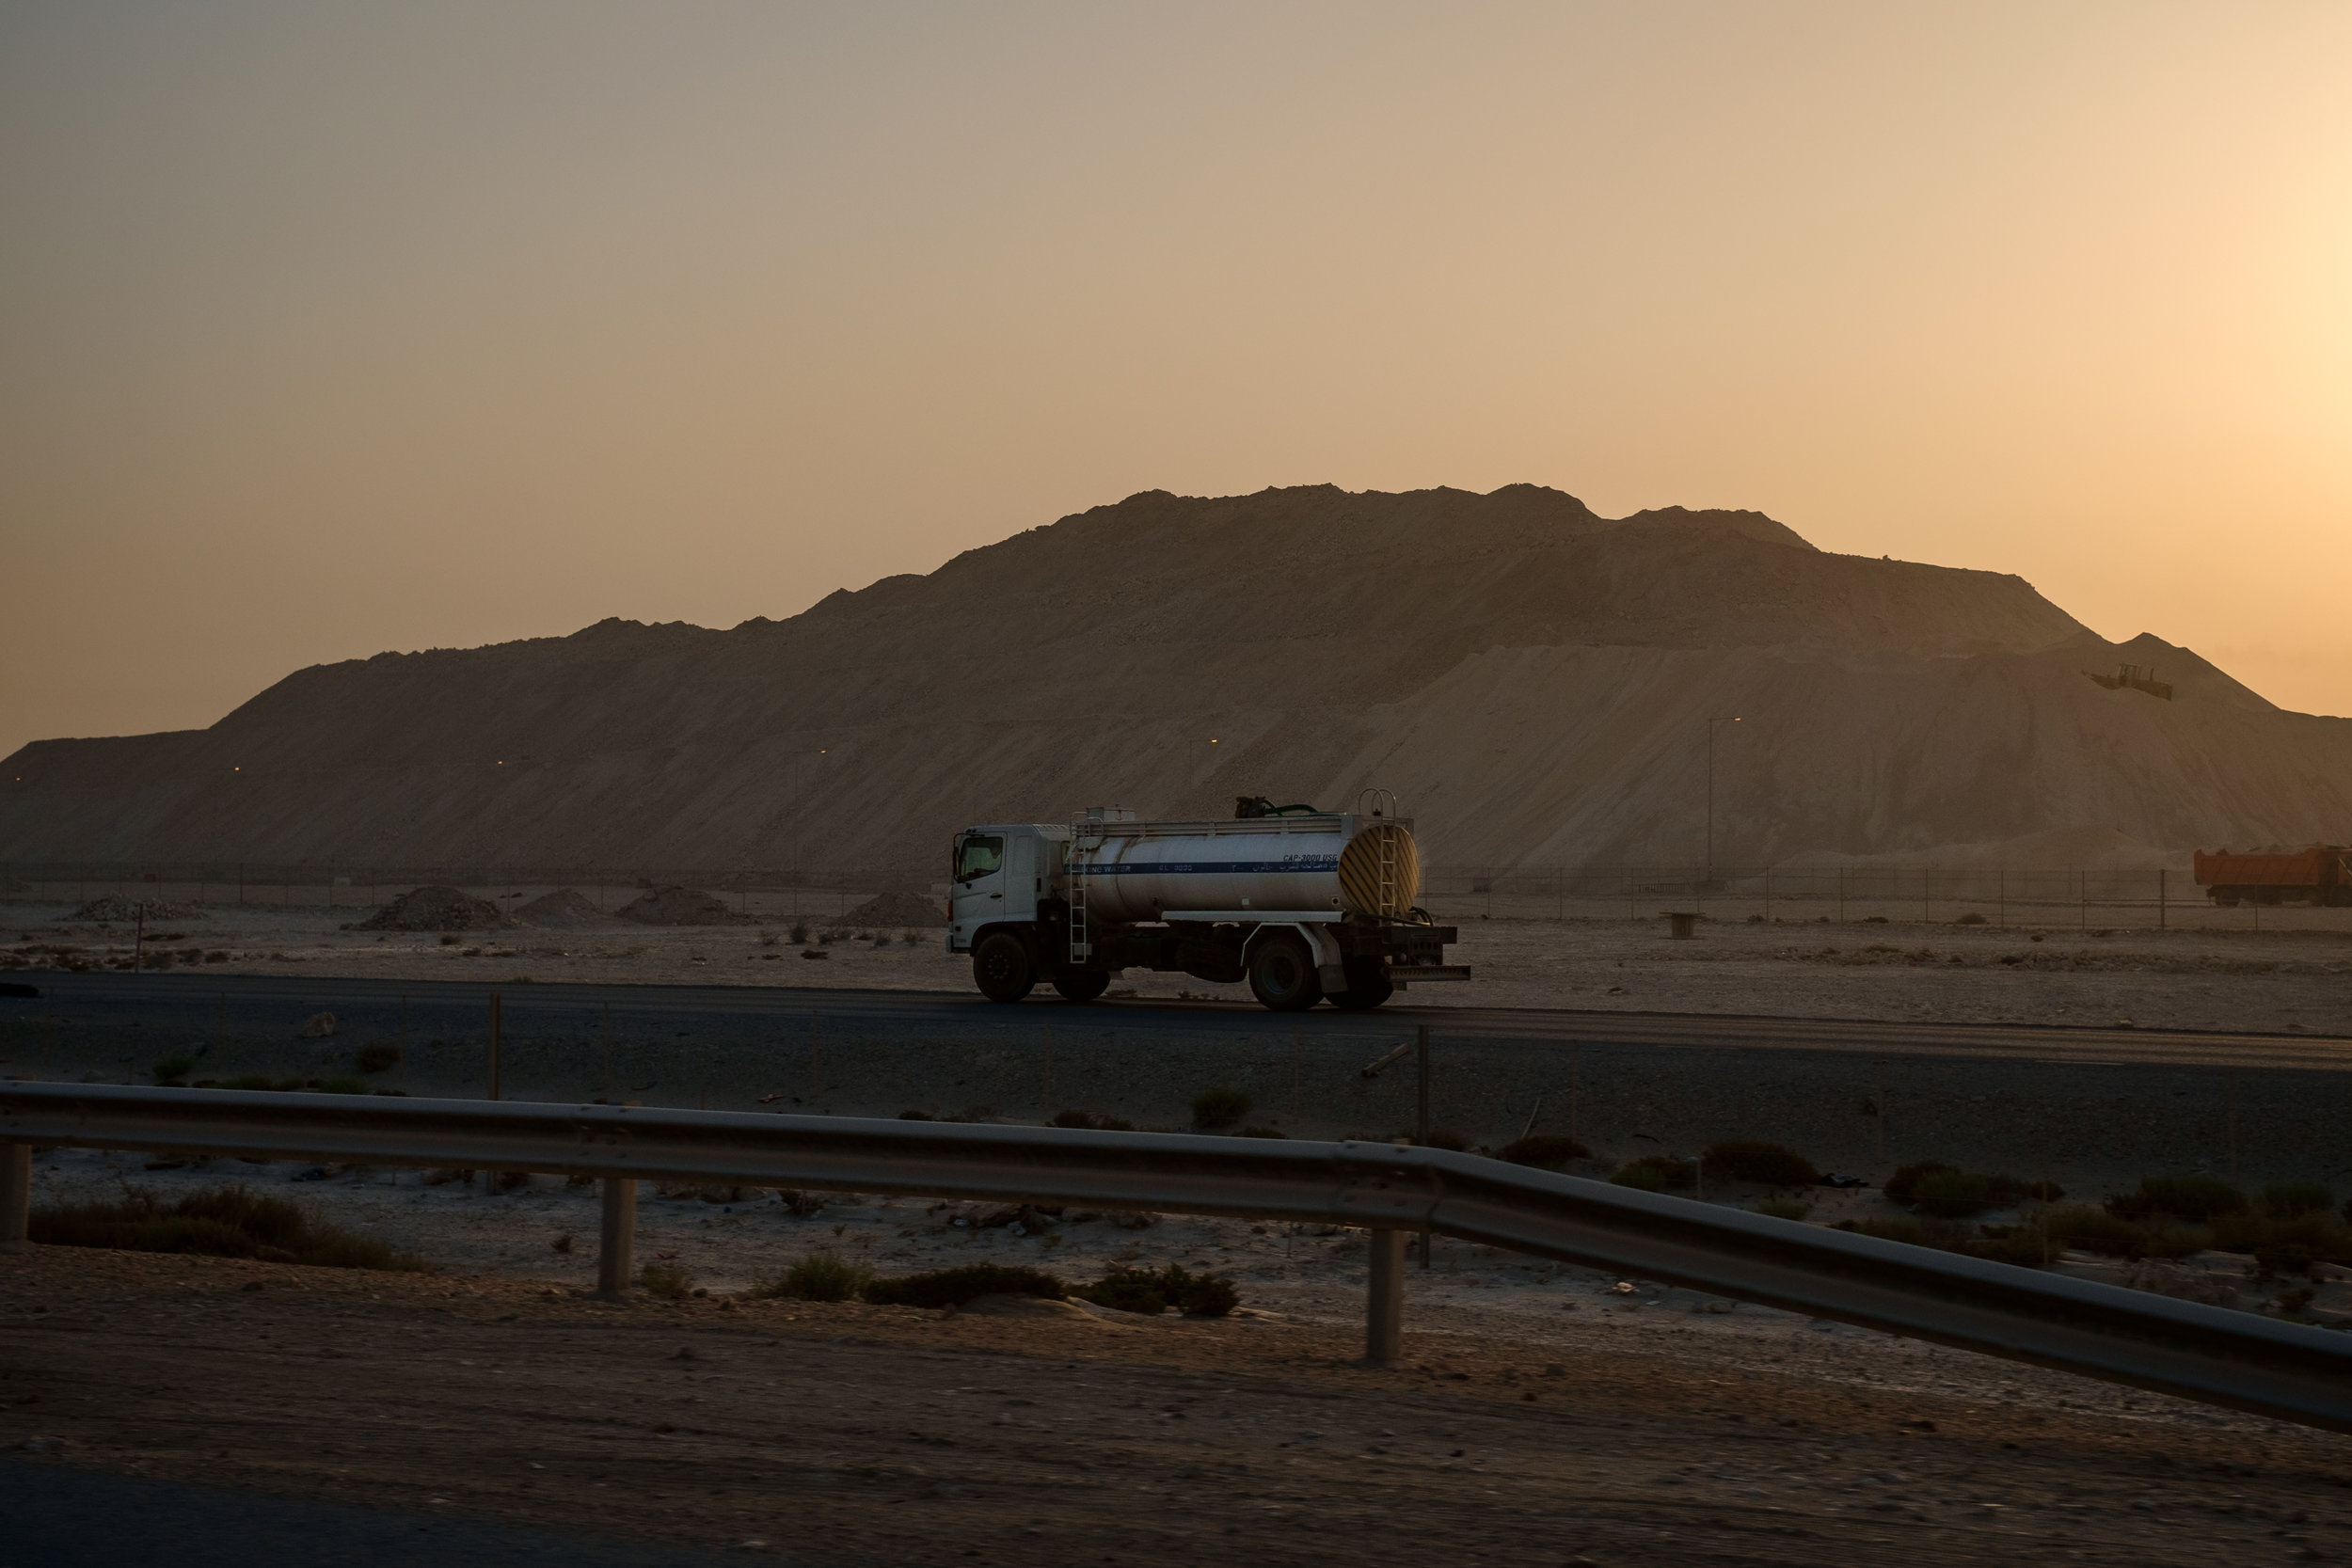  The ubiquitous semi truck, this one carrying water, is seen at sunrise at a massive construction site just north of Lusail City. 